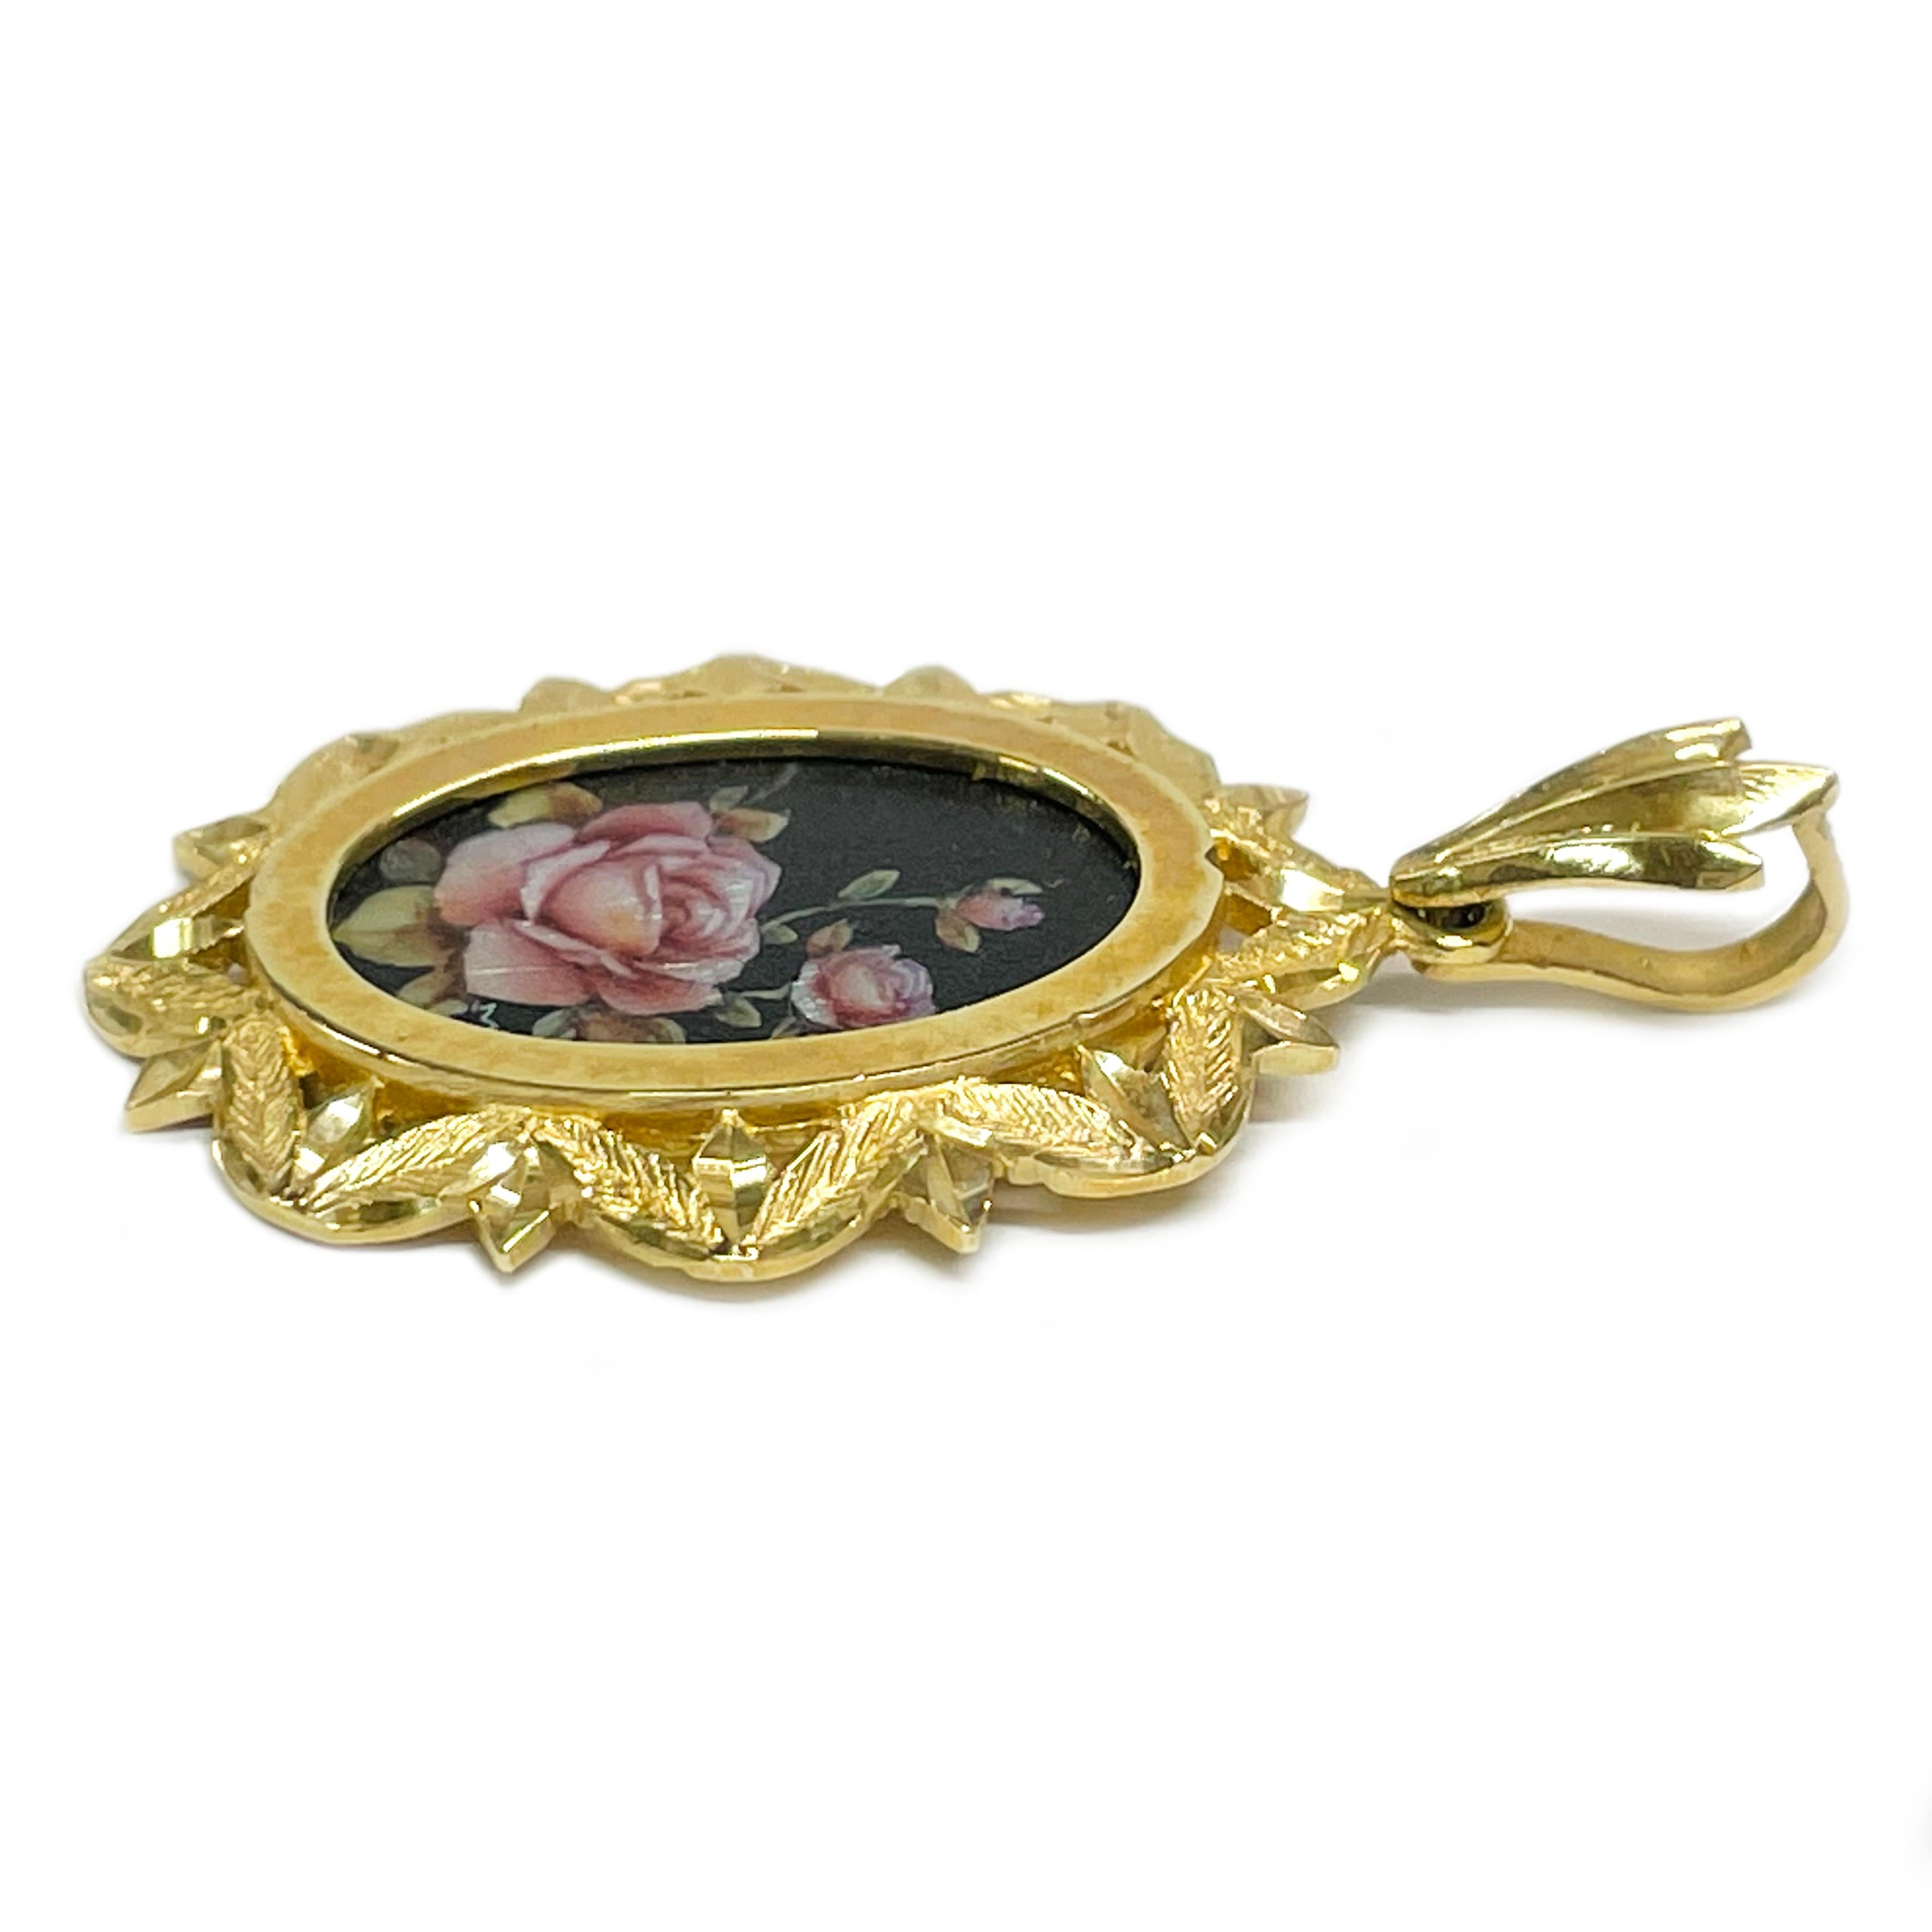 Contemporary 14 Karat Pink Roses Masterpiece Hand Painted MOP Pendant #0646 For Sale